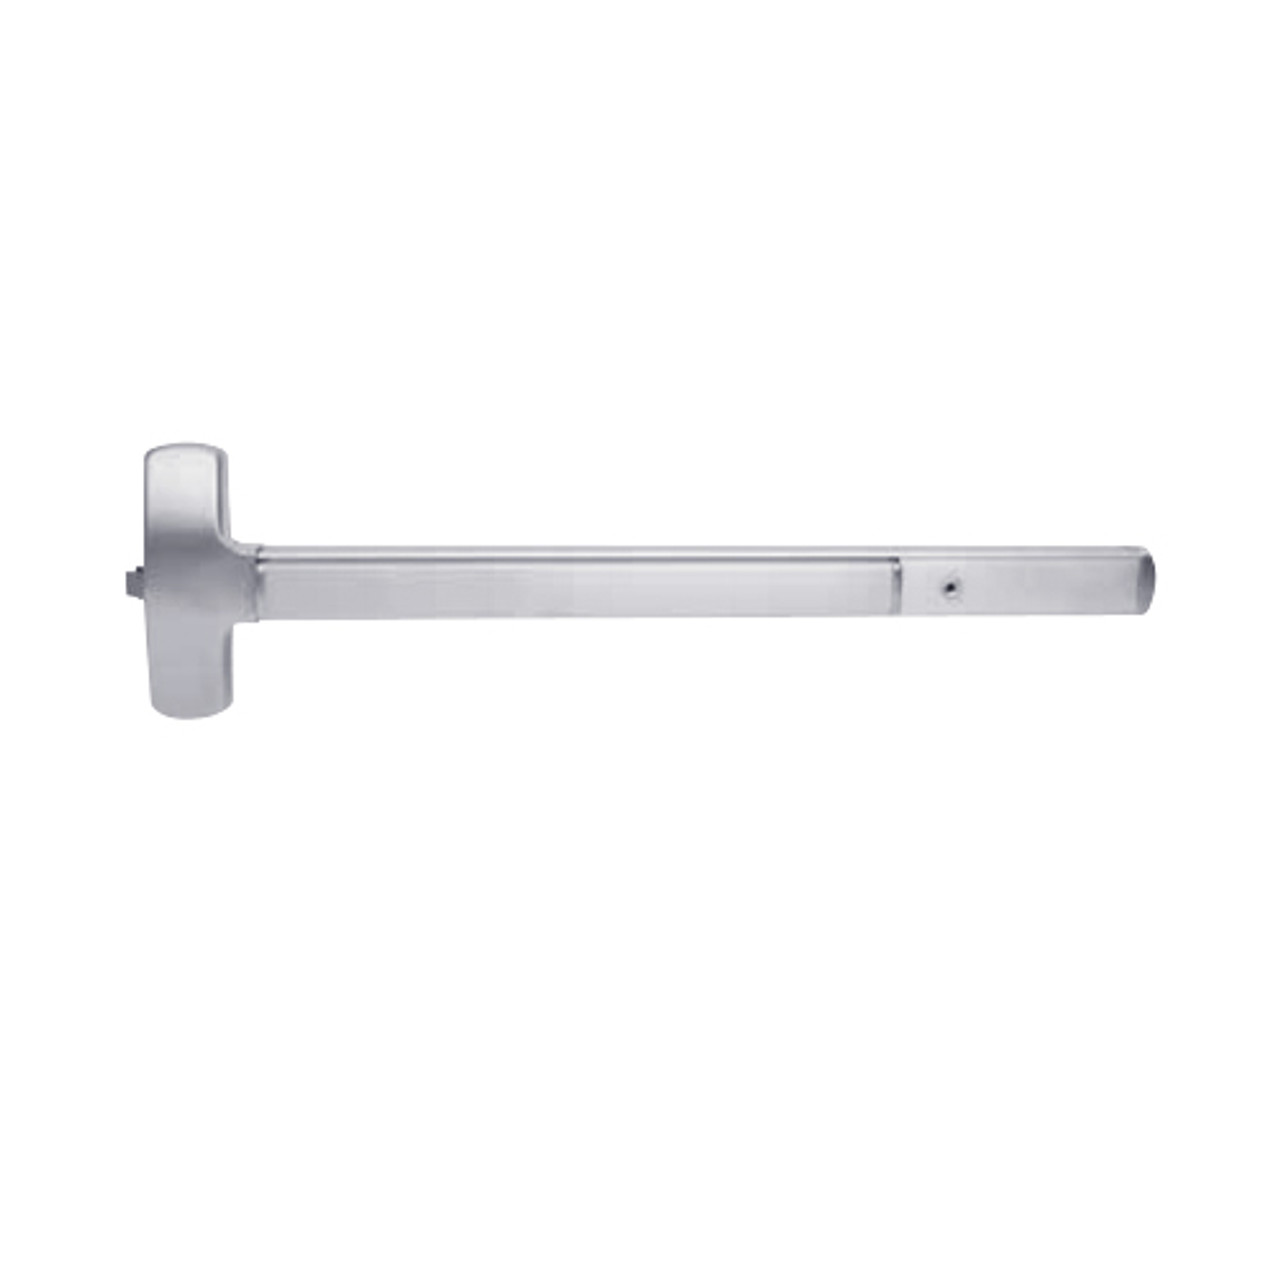 25-R-NL-OP-US32-4 Falcon Exit Device in Polished Stainless Steel